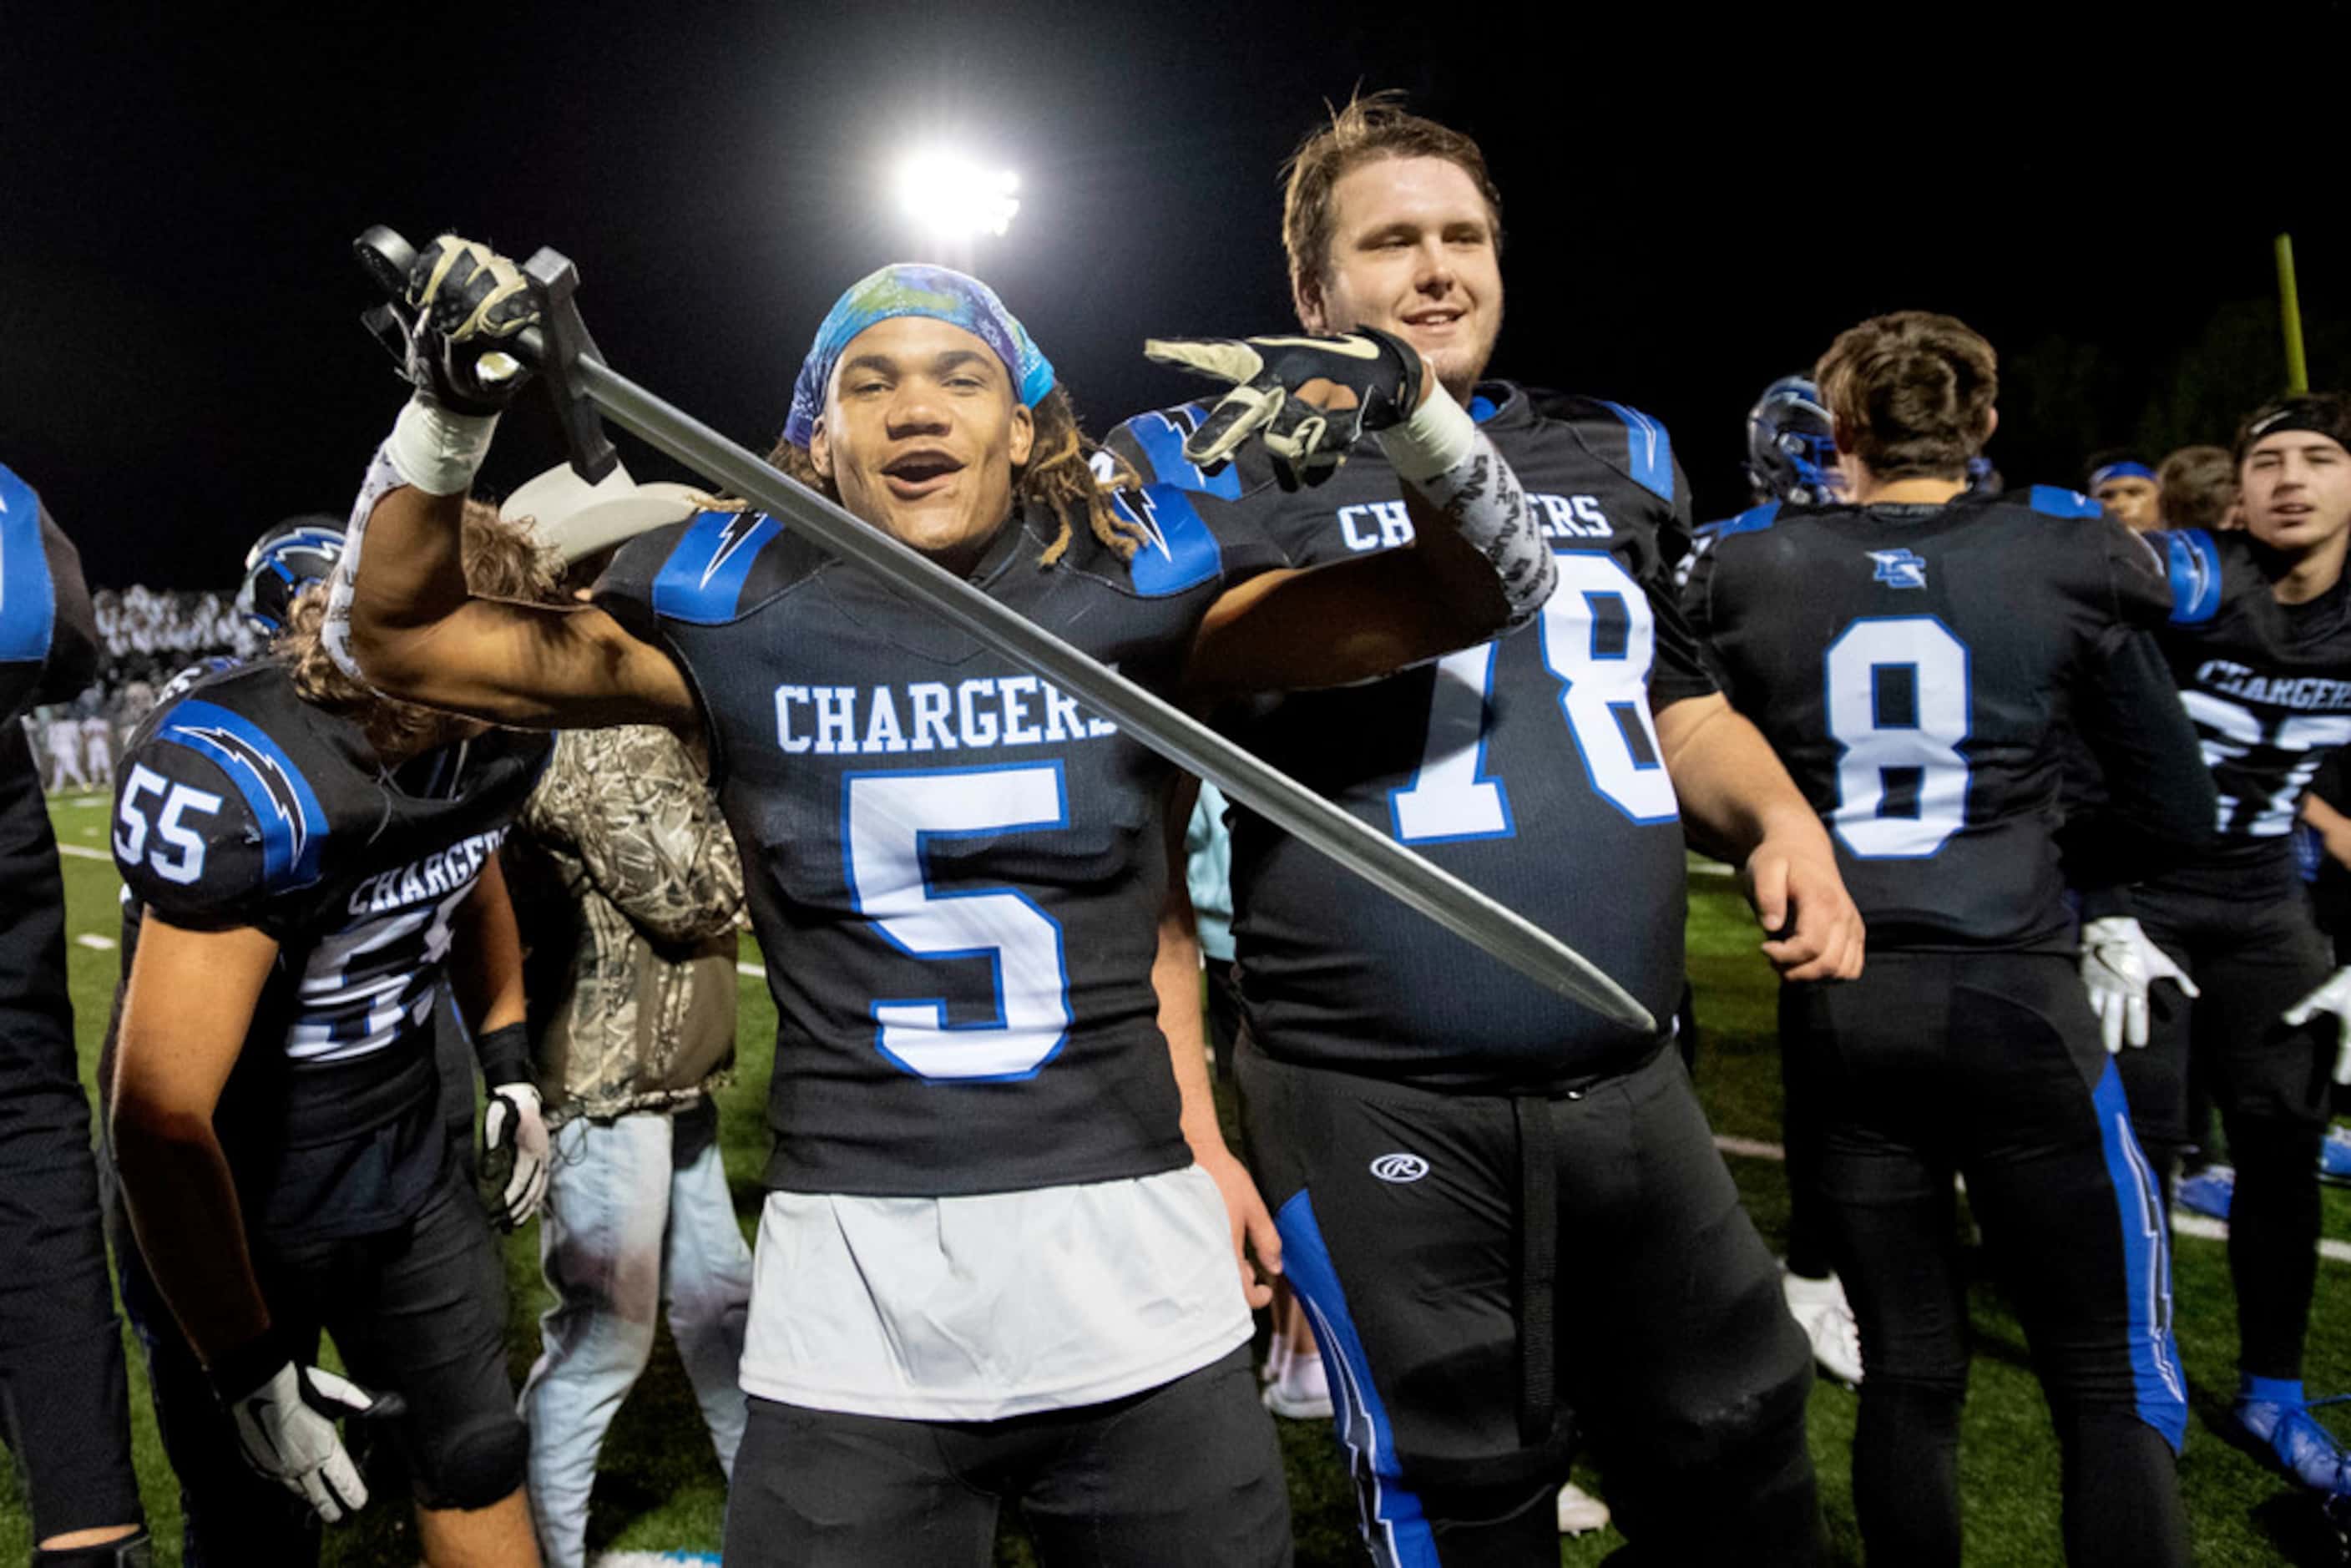 Dallas Christian senior defensive back Peyton Veasley (5) poses with a fake sword after his...